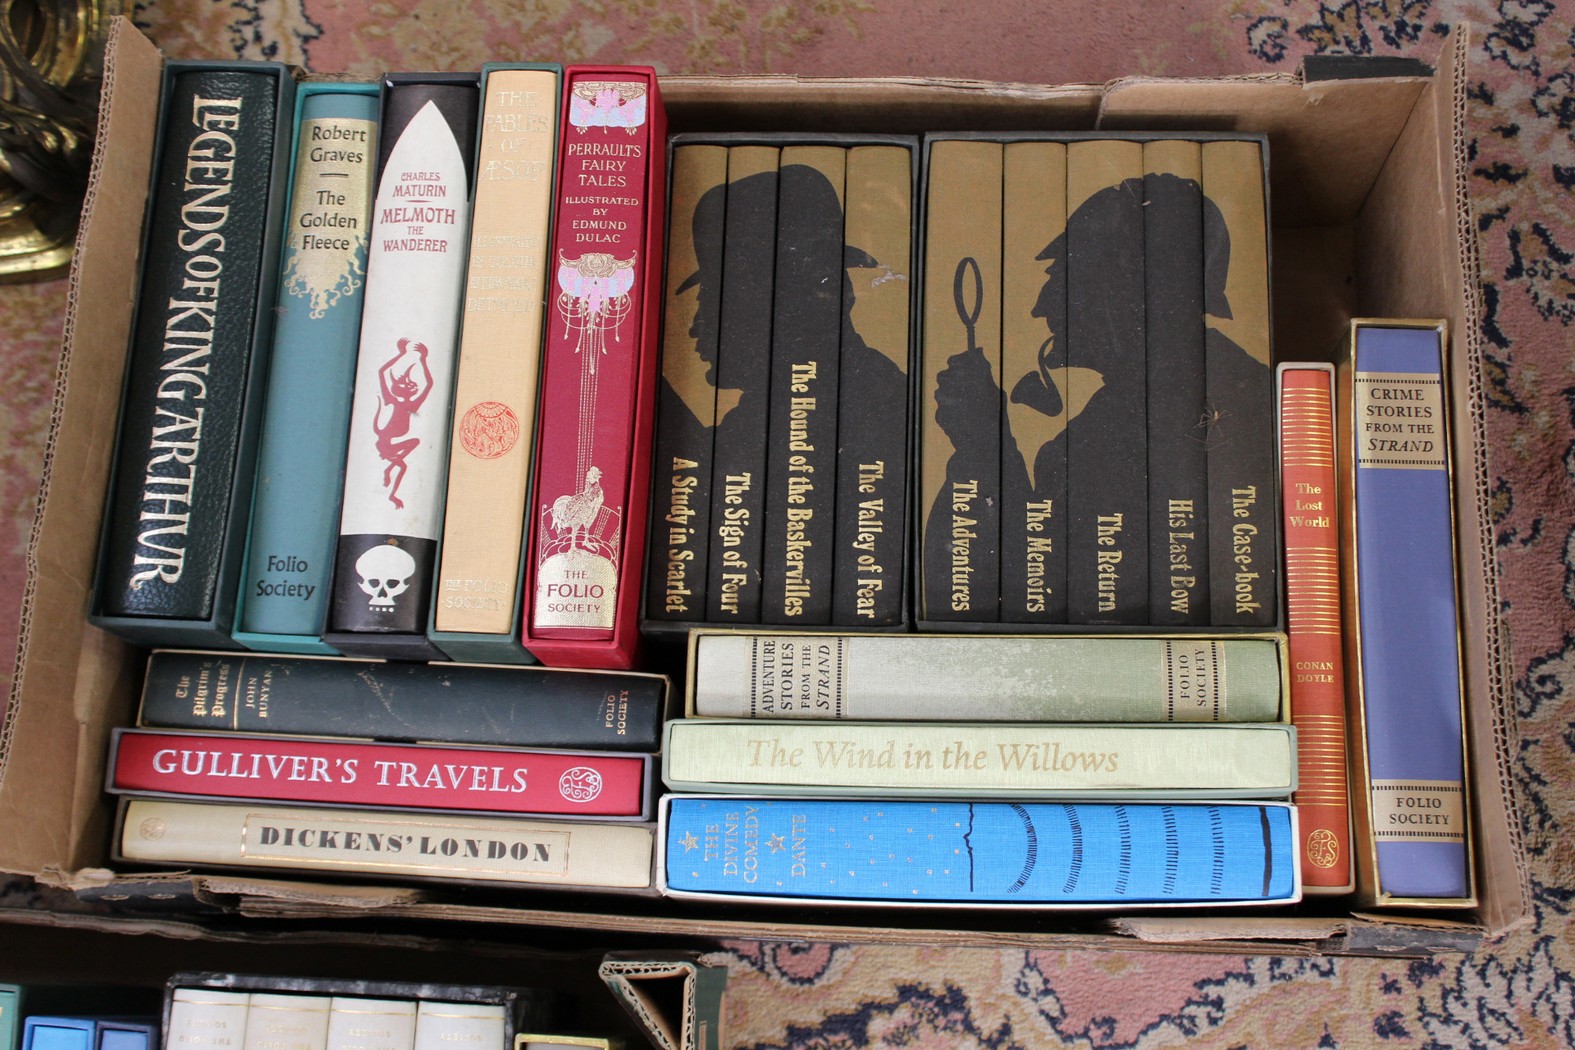 An extensive collection of Folio Society publications, all books complete with slipcases.